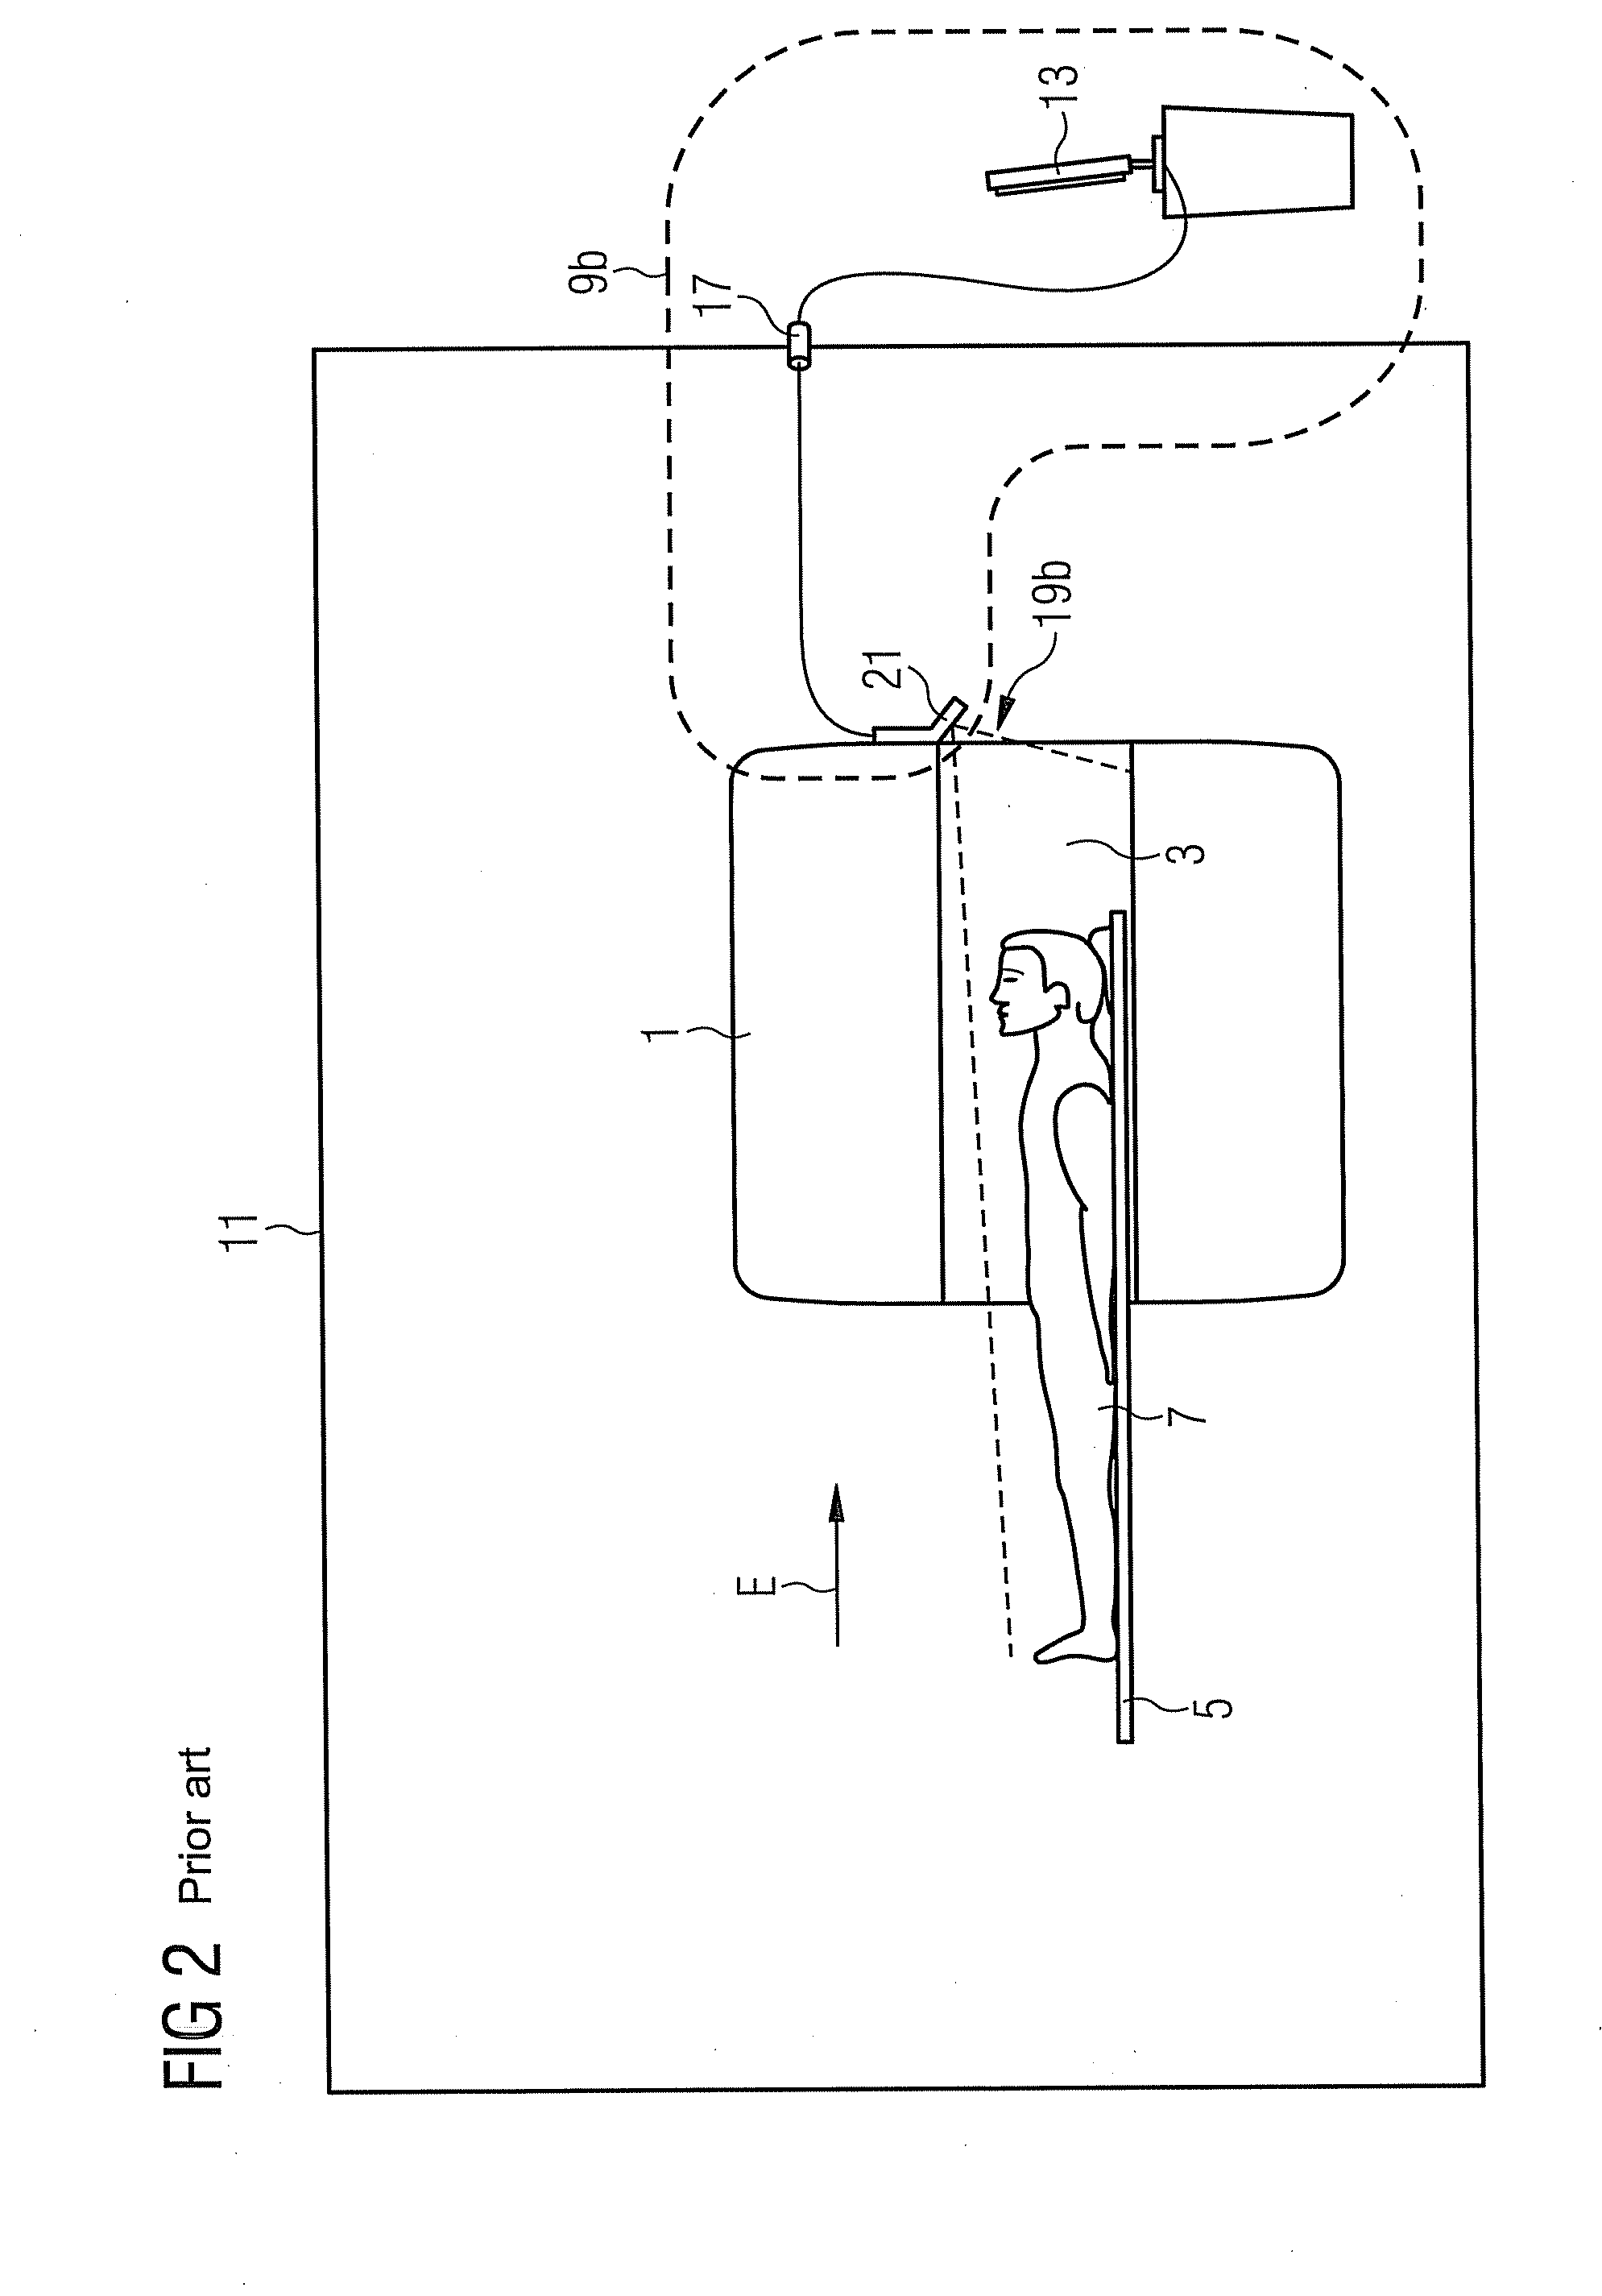 Tomography arrangement and method for monitoring persons